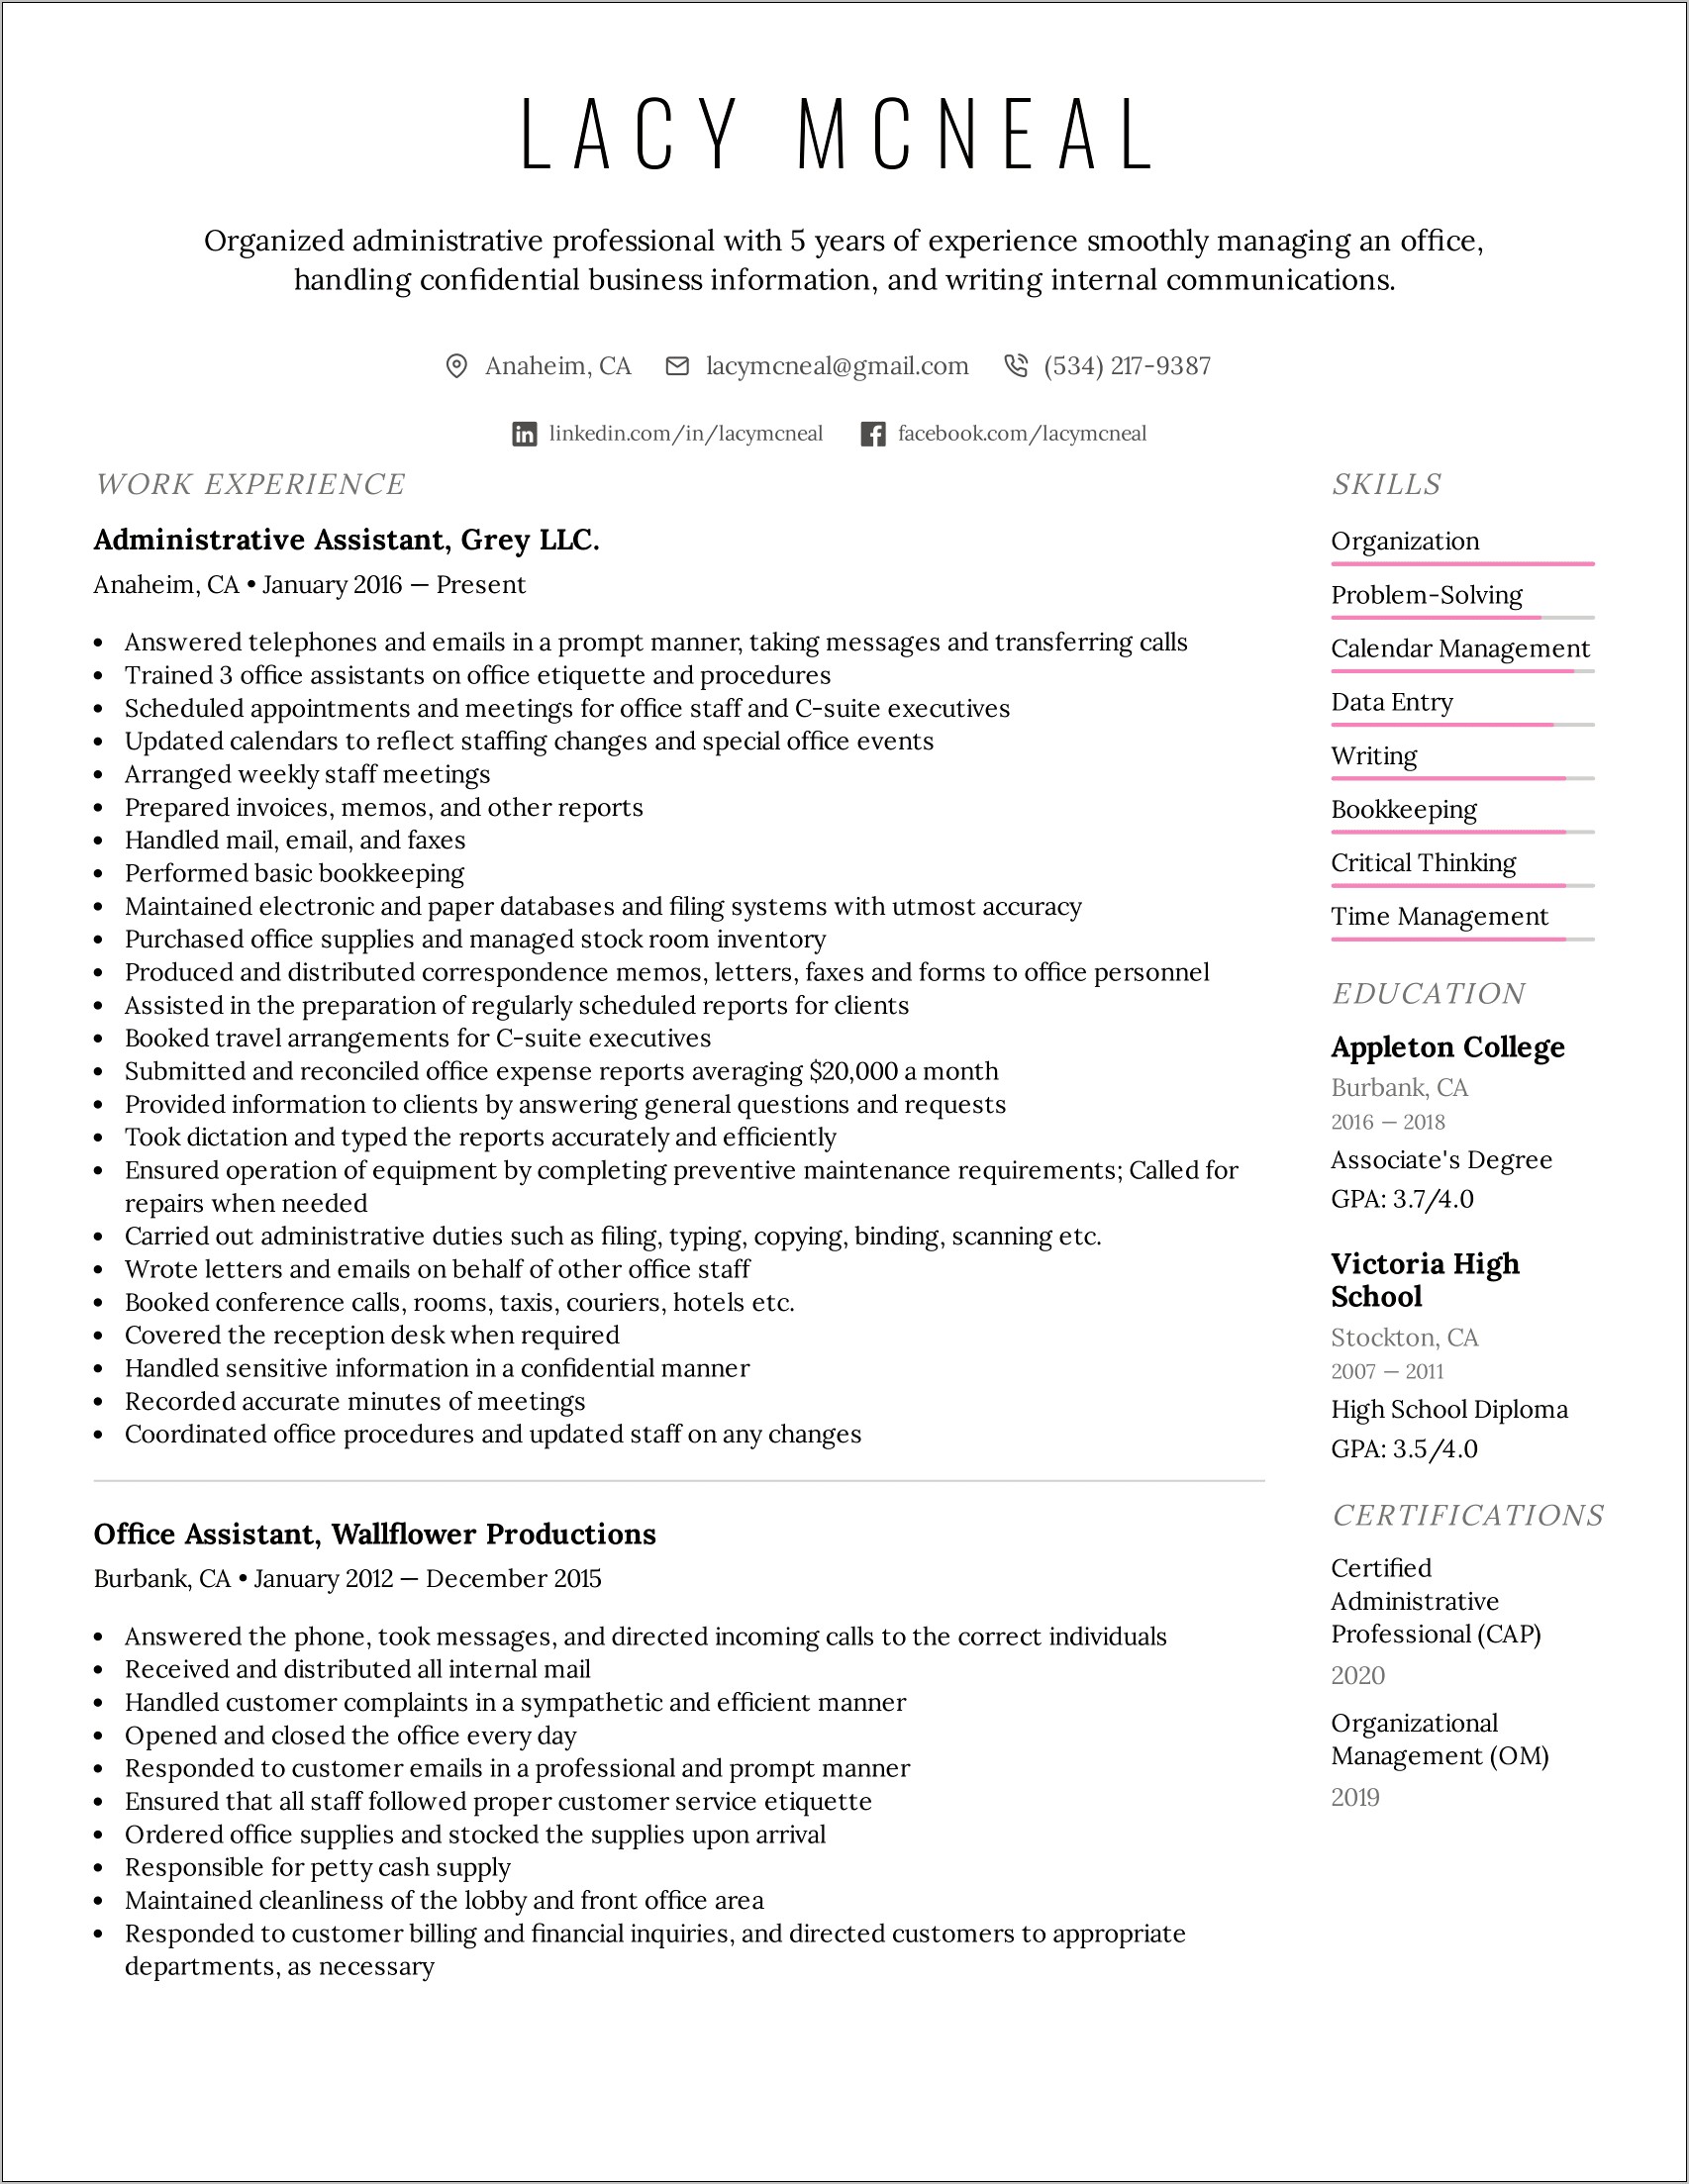 Resume Summary Statement For Administrative Assistant